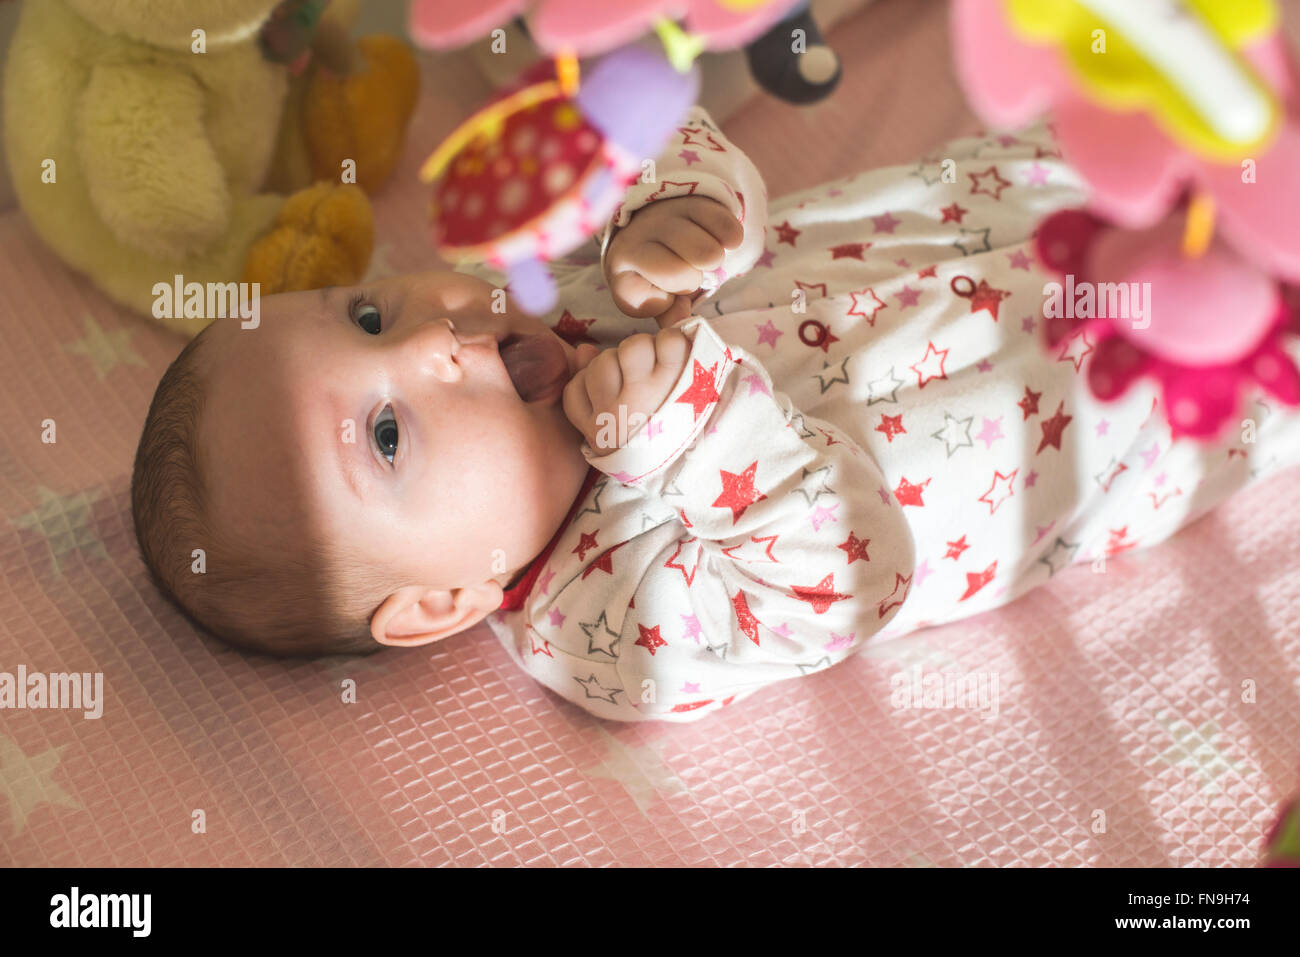 Girl lying in cot with toys Stock Photo